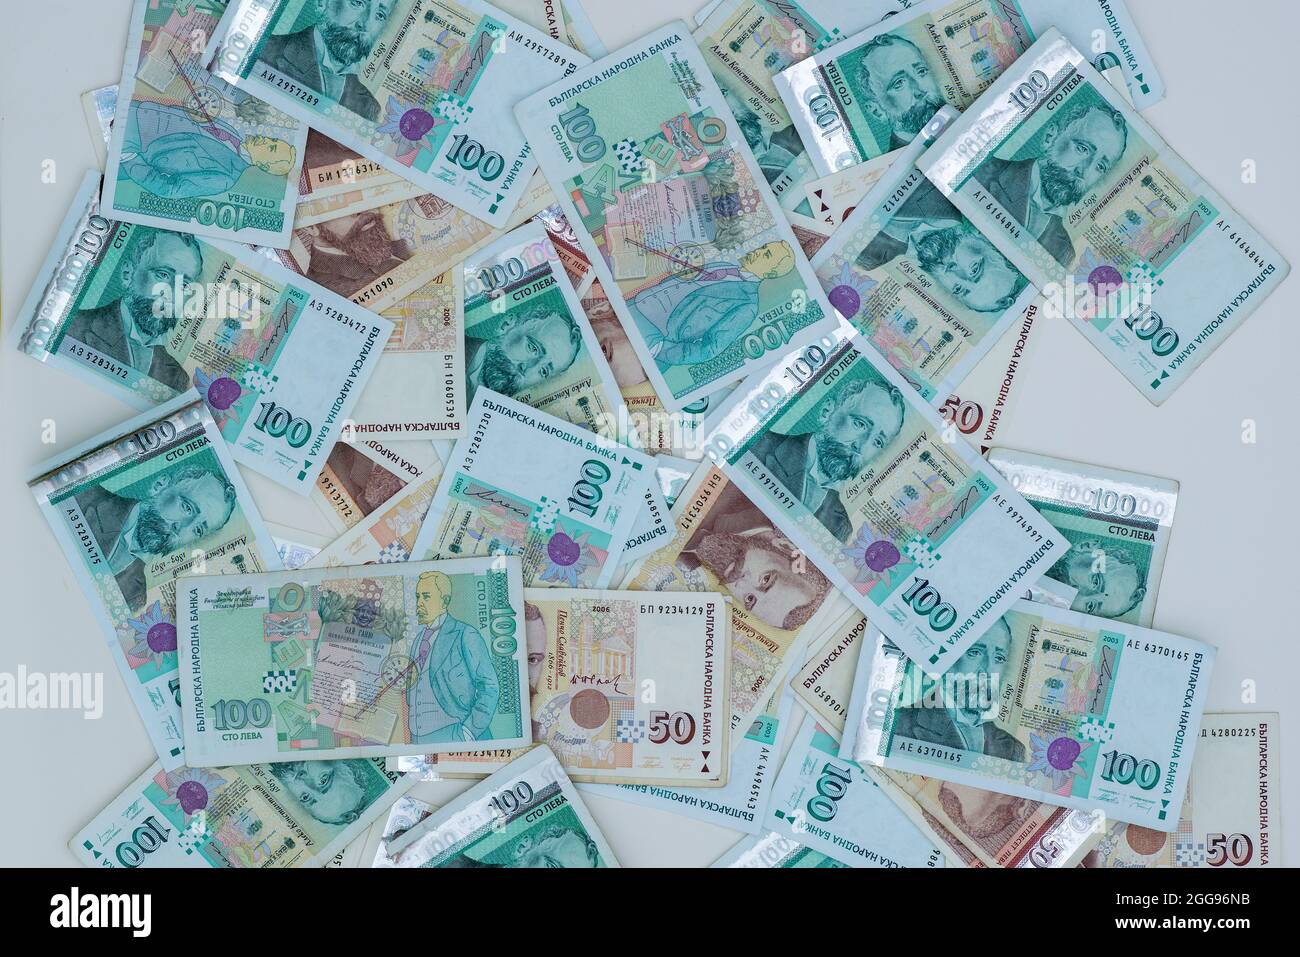 Pile of large sum bank notes, Bulgarian Lev currency Stock Photo